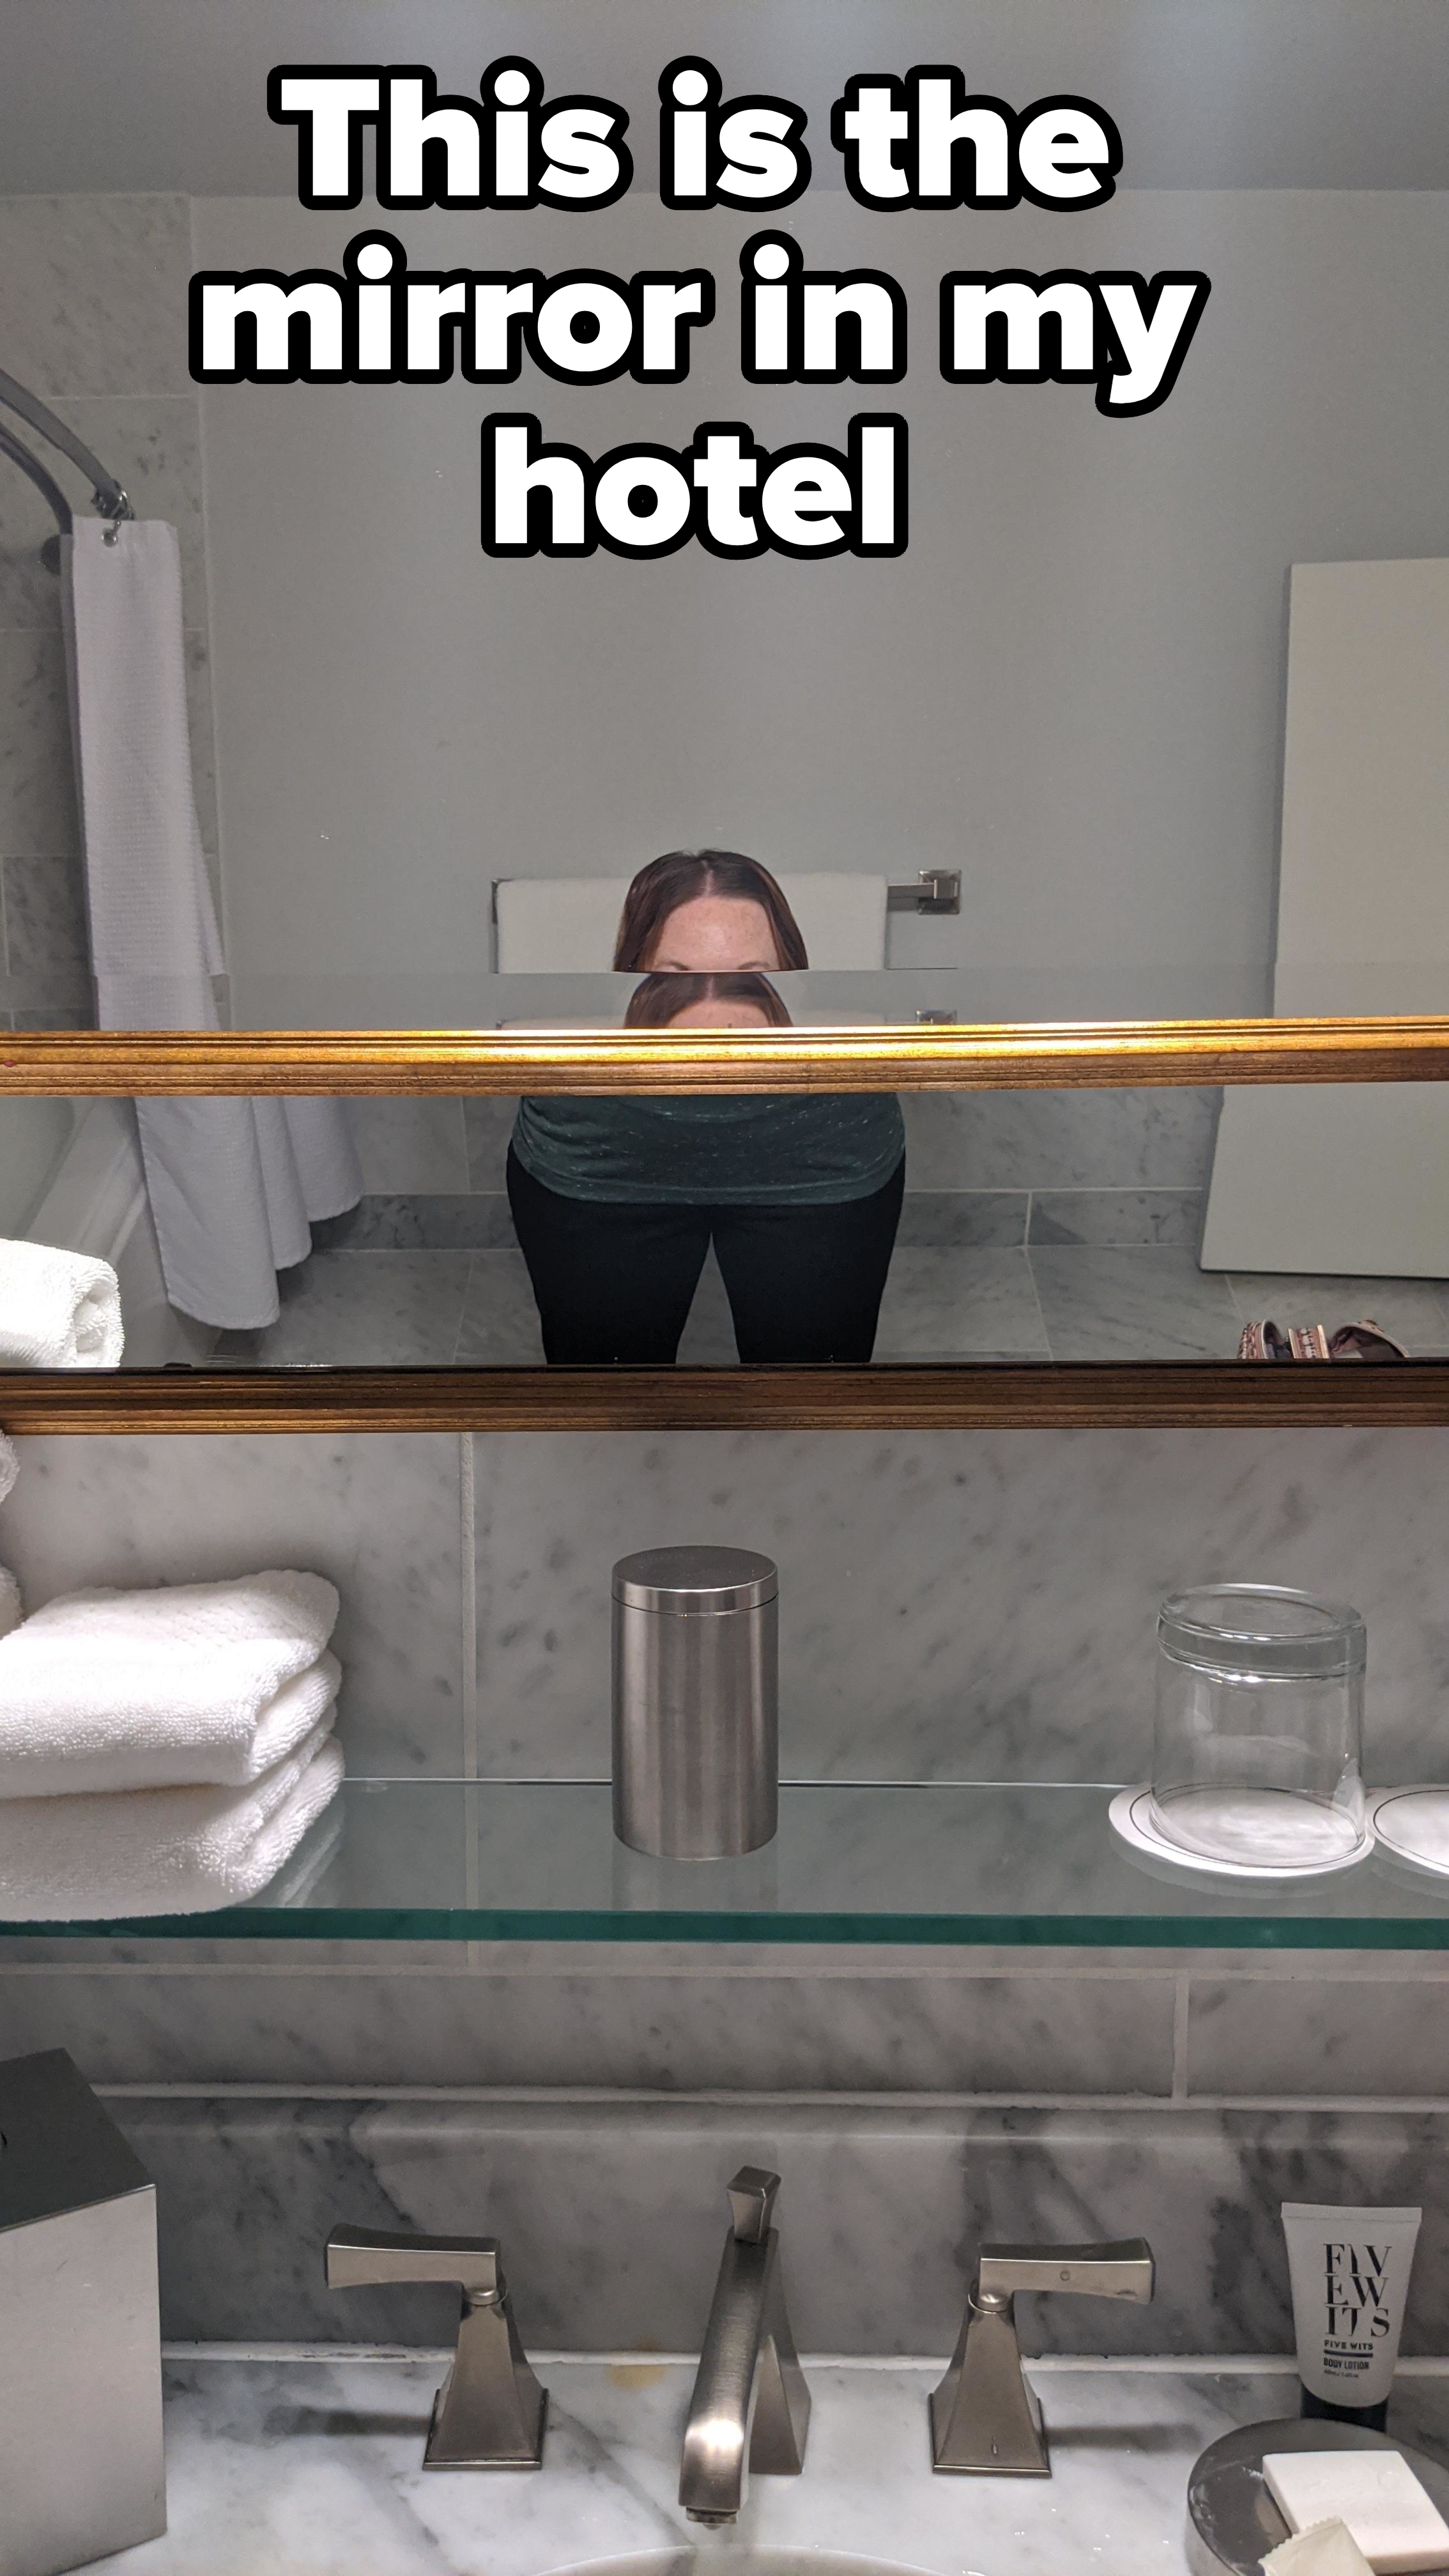 A hotel bathroom mirror that cuts off the image of a short person